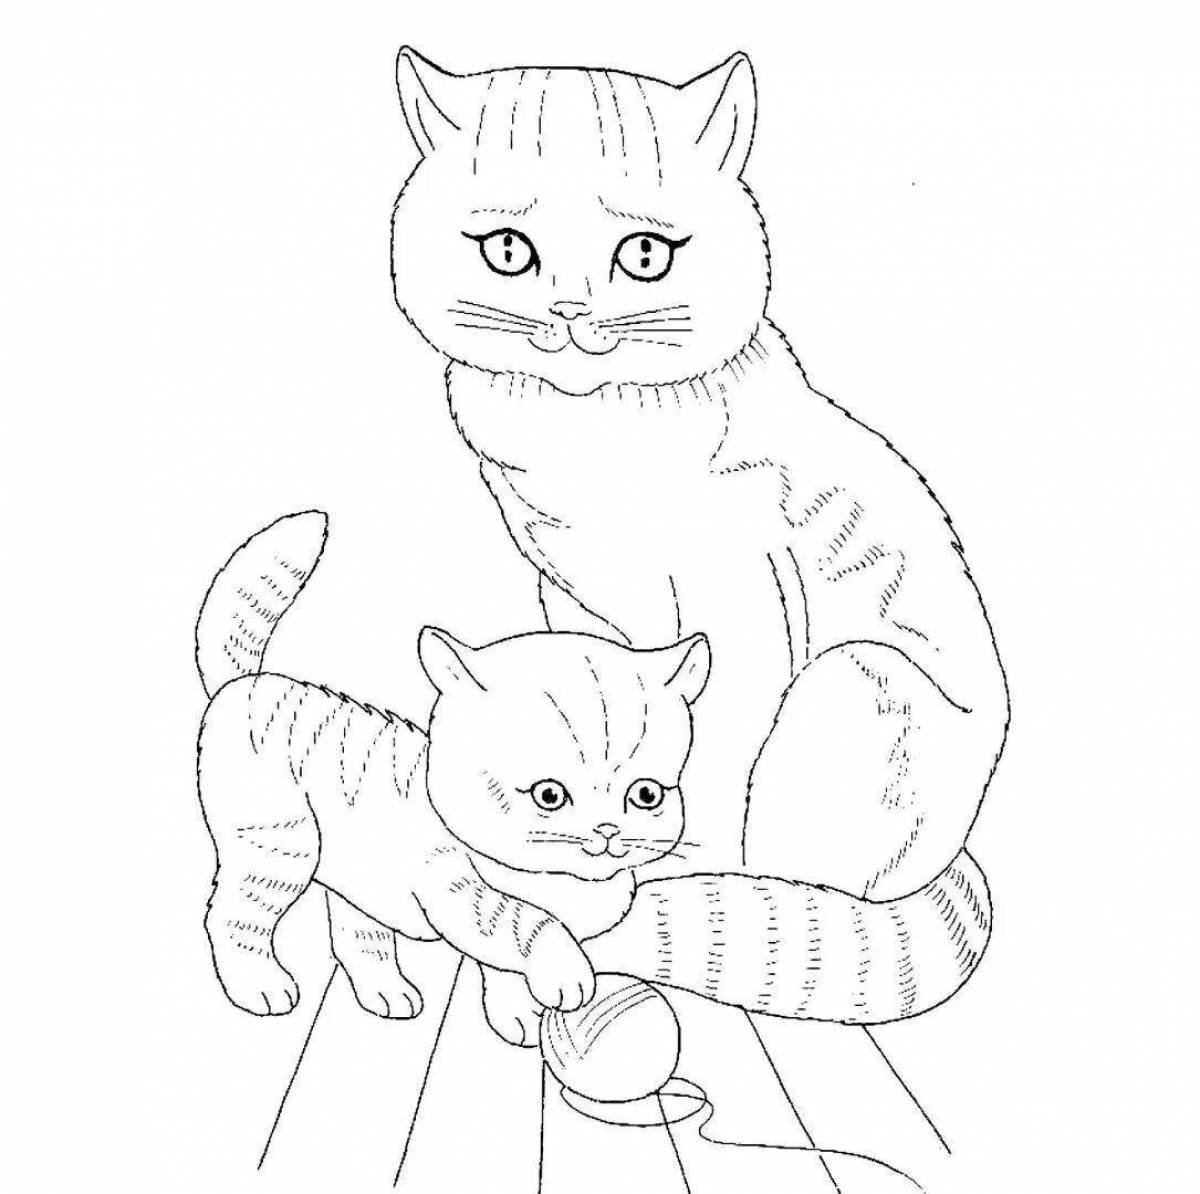 Silly kitten drawing for kids